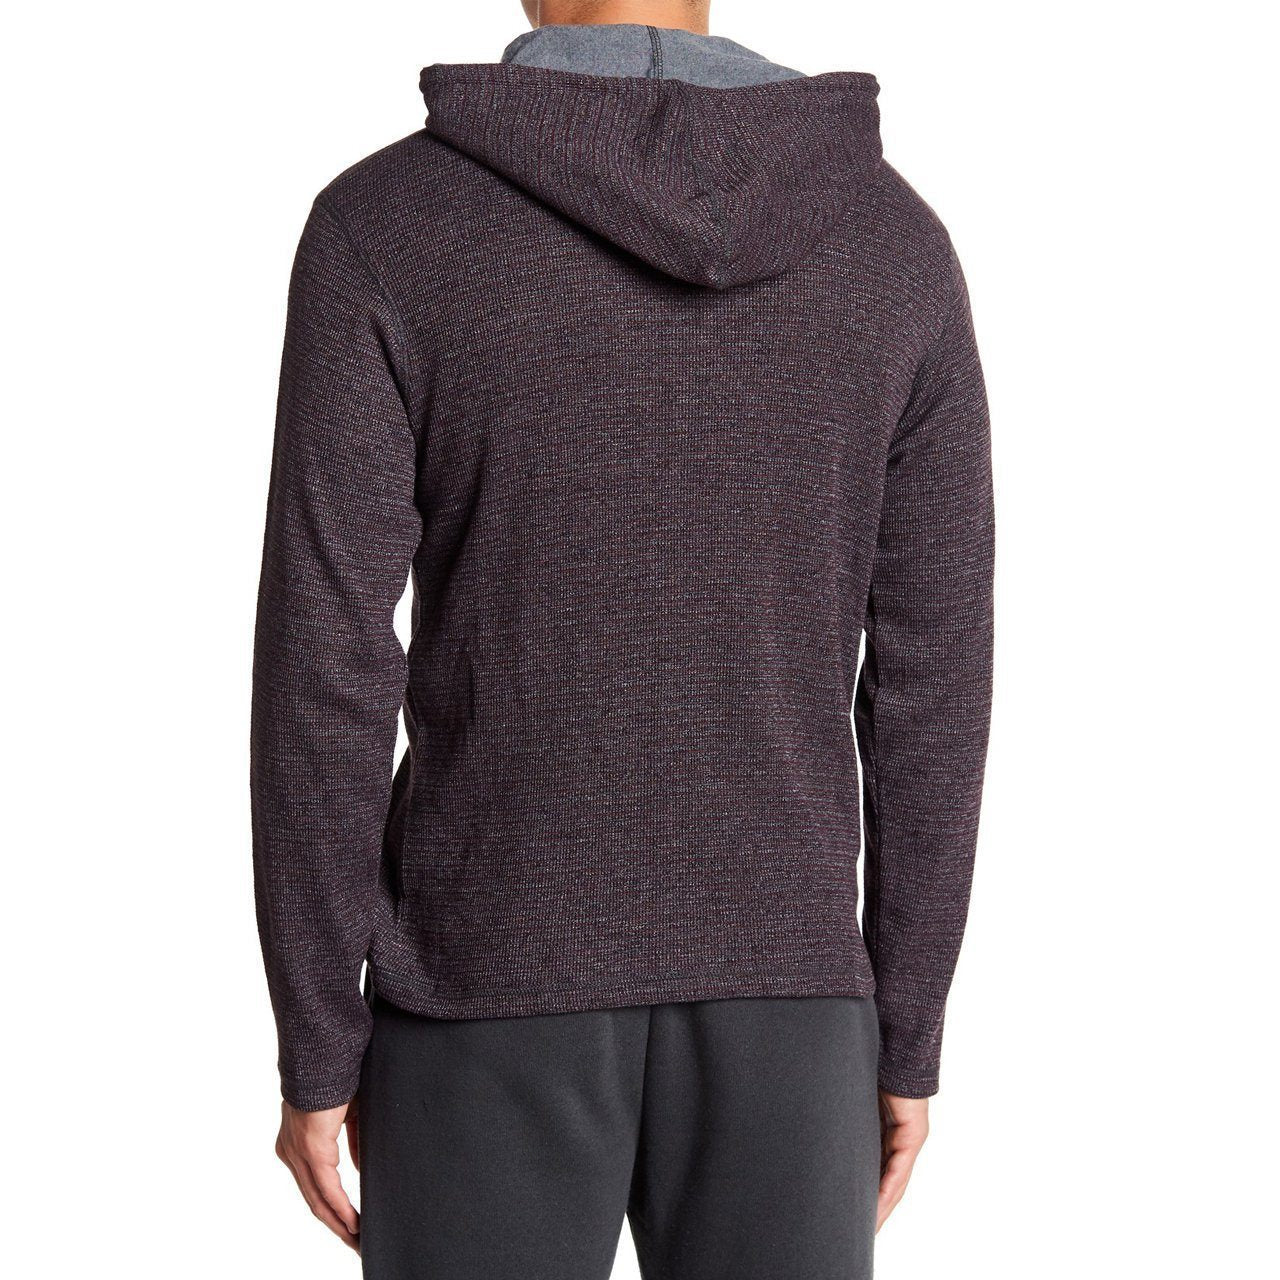 Pullover - Kyle Thermal Henley Pullover